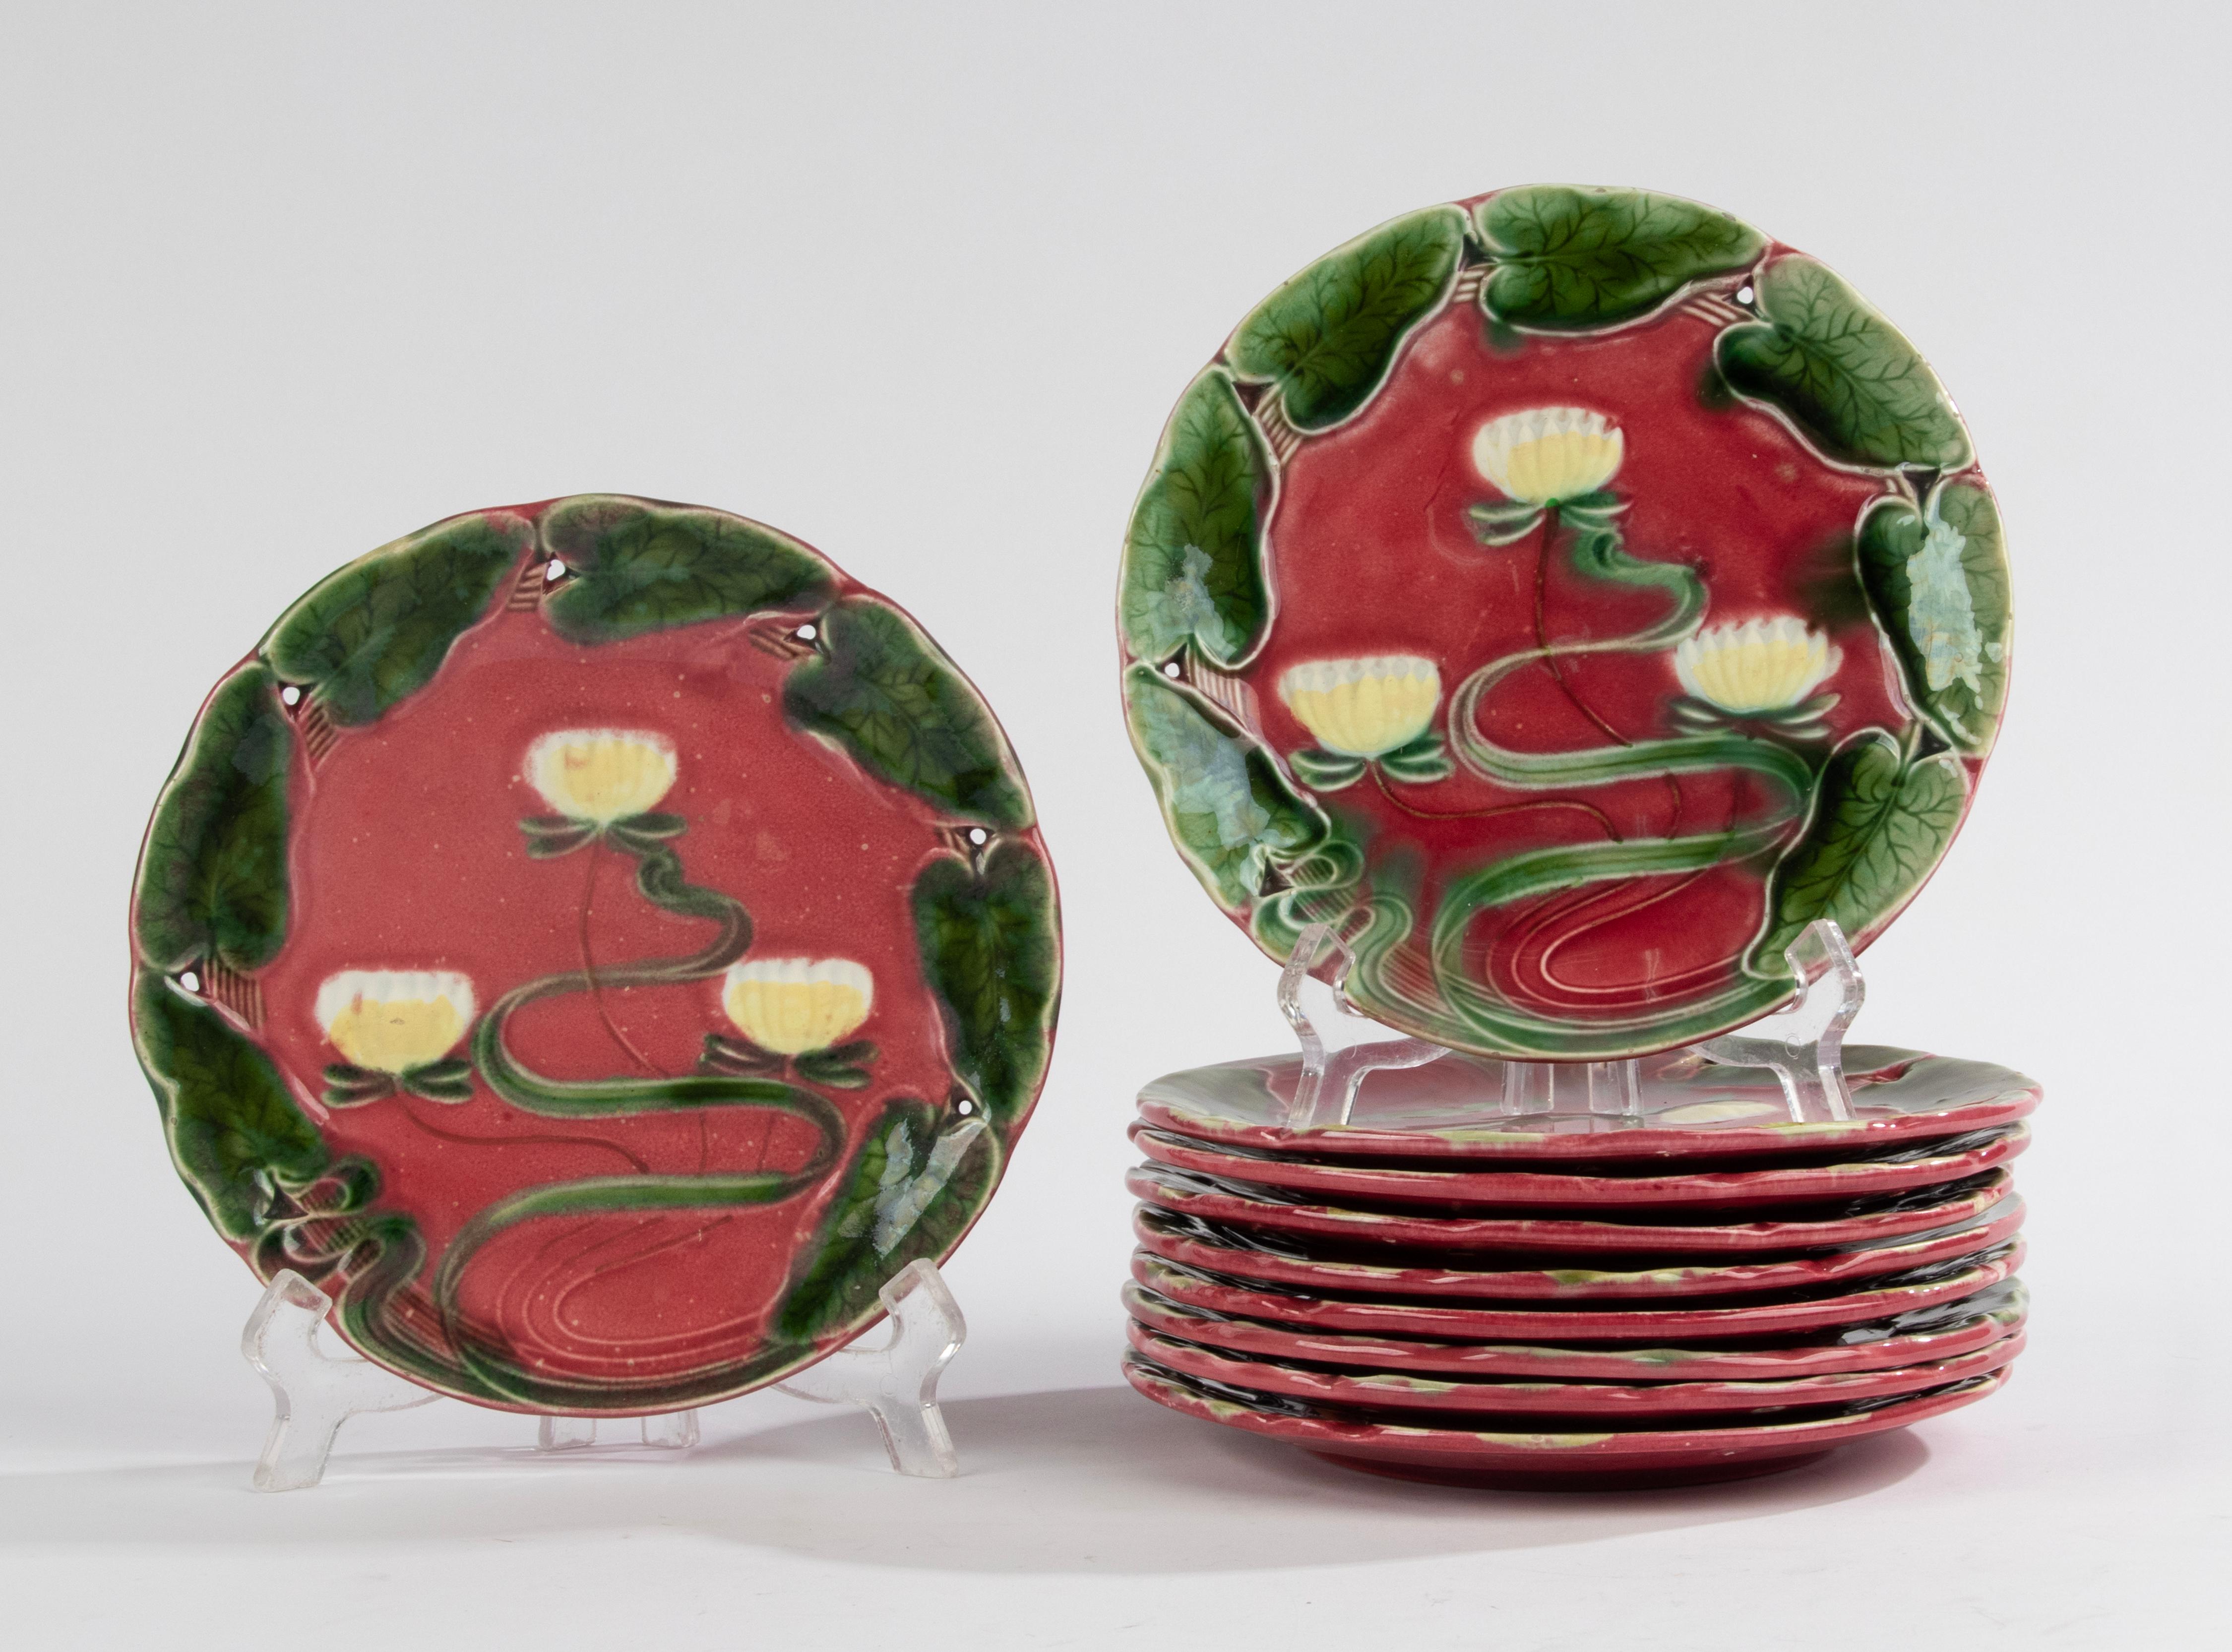 A lovely set of 10 Art Nouveau majolica plates, made by Villeroy & Boch. Colorful pattern with water lilies. 
The plates date from circa 1900. 
They are in good condition, no chips and no hairlines. 
Beautiful color and glaze. 

The plates are Ø17